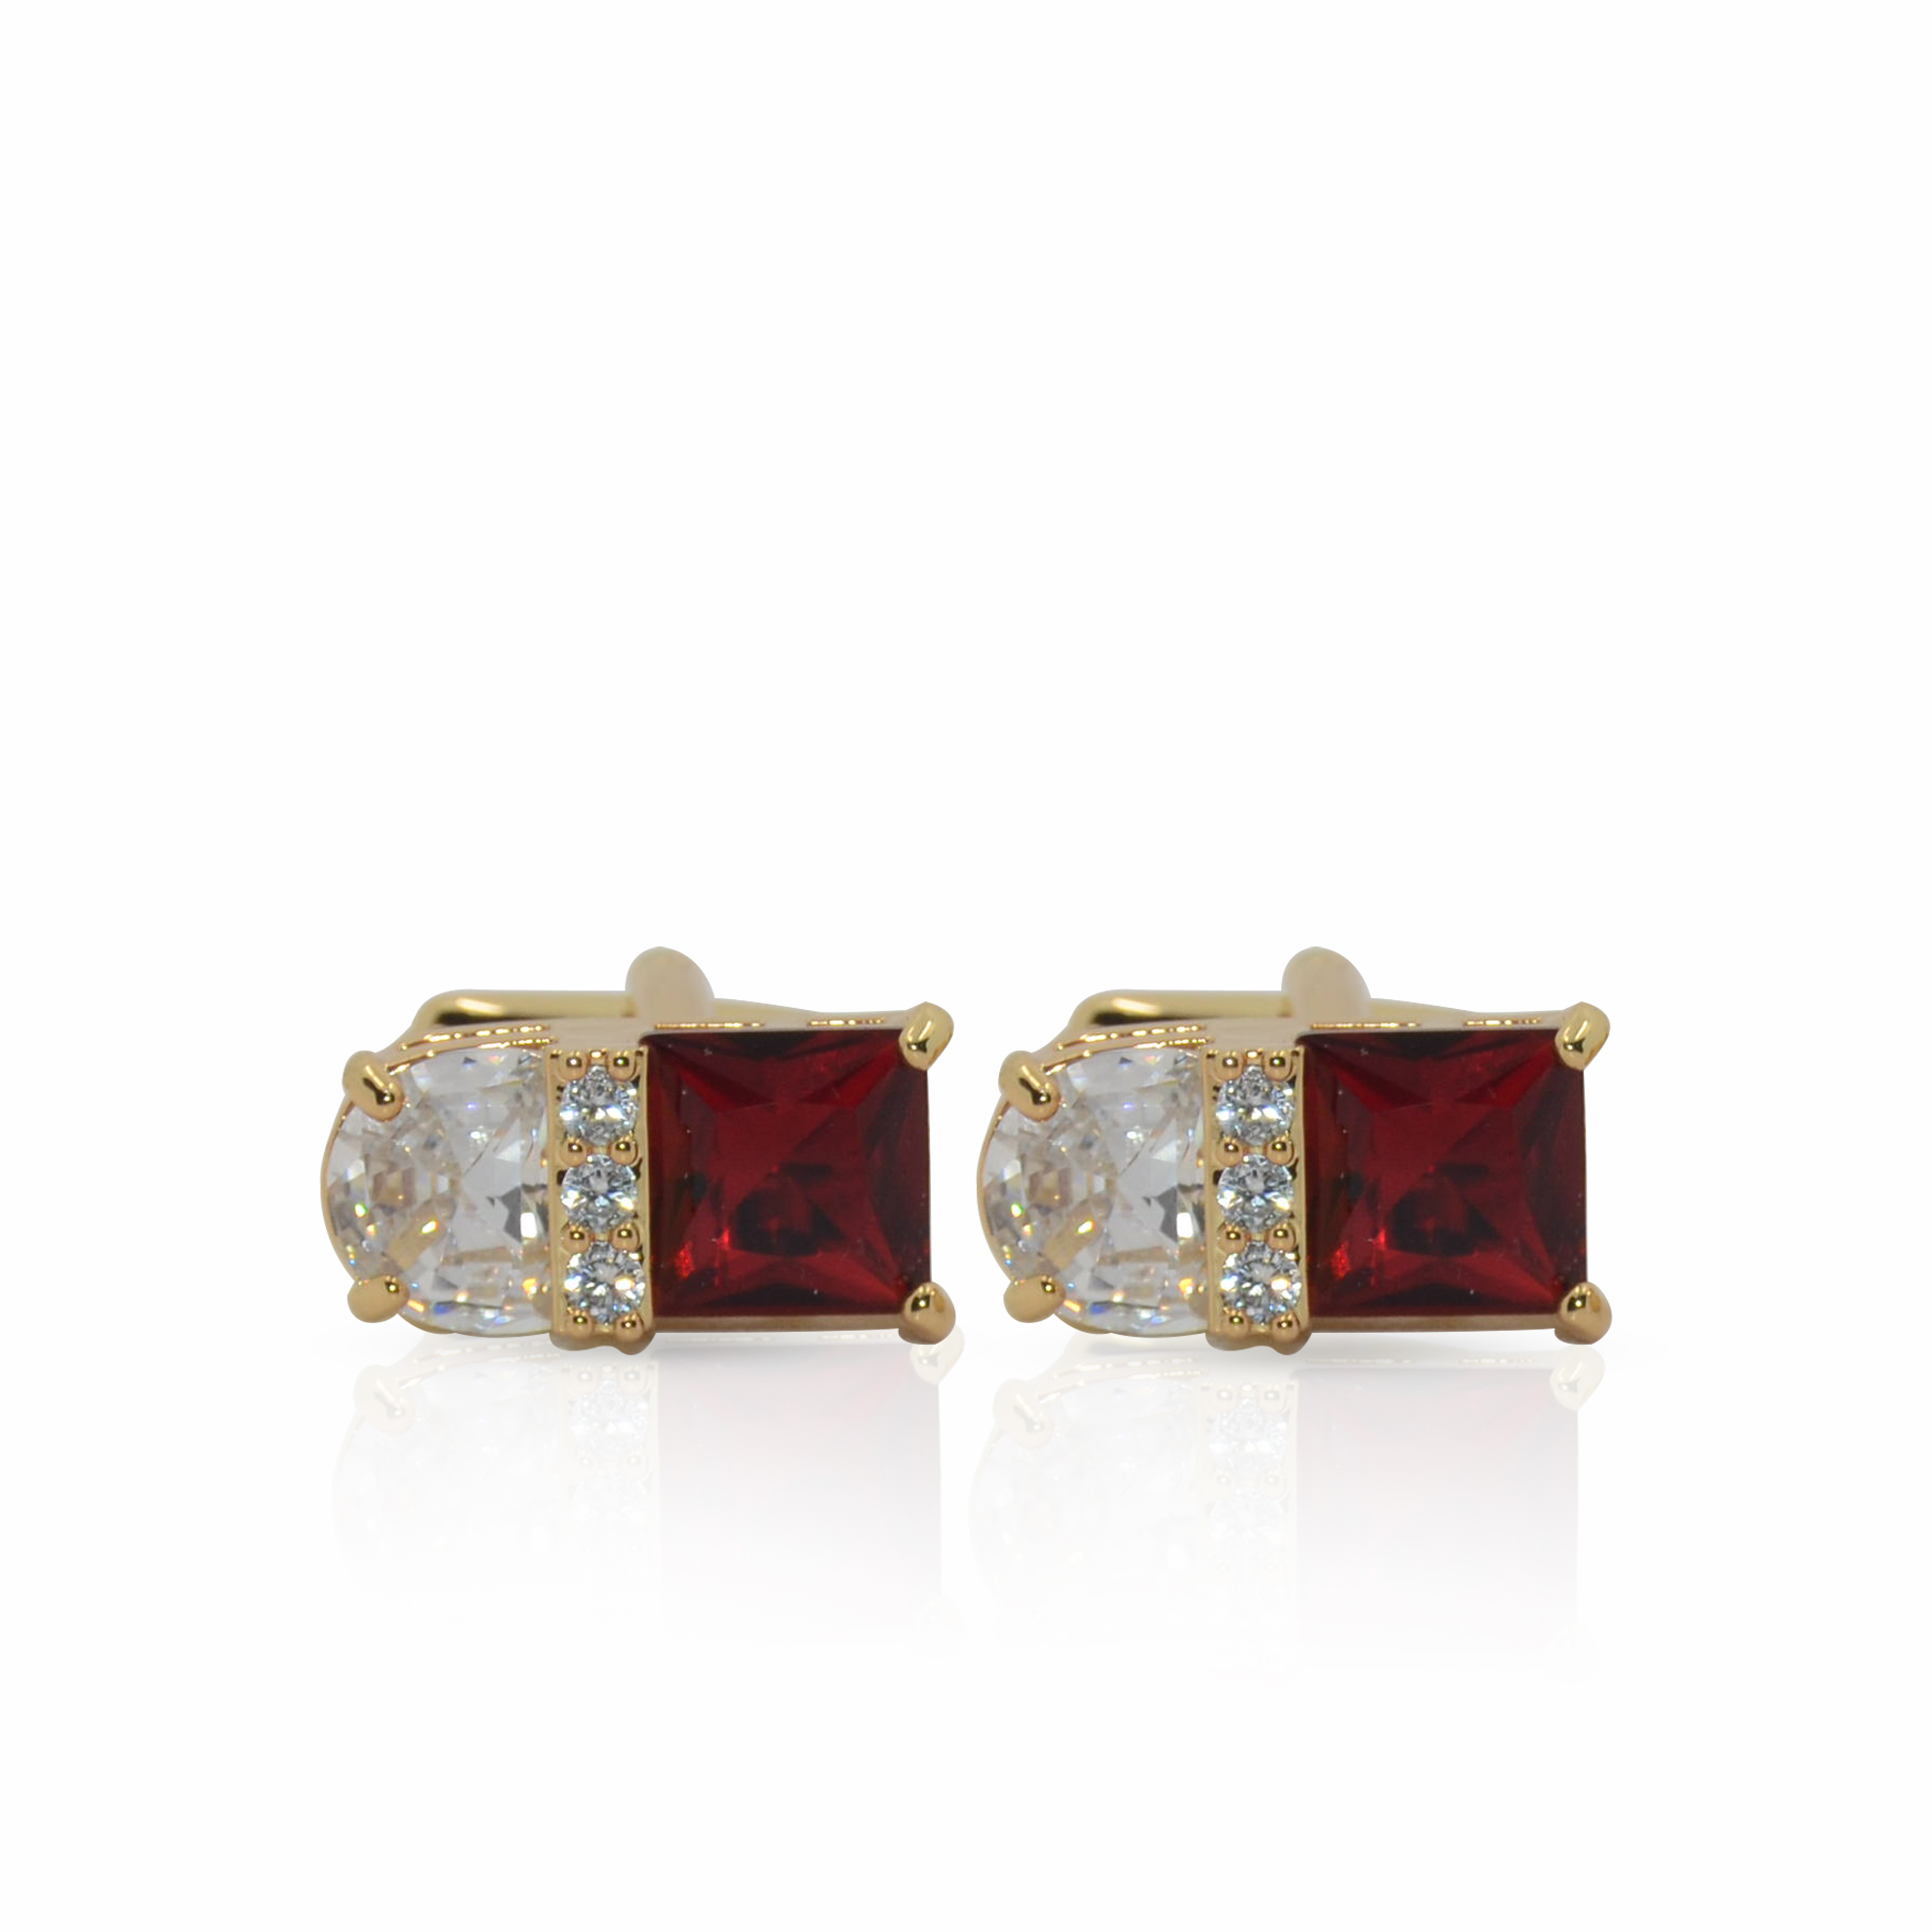 Cufflers Designer Red Square Crystal Cufflinks CU-4030-A with Free Gift Box